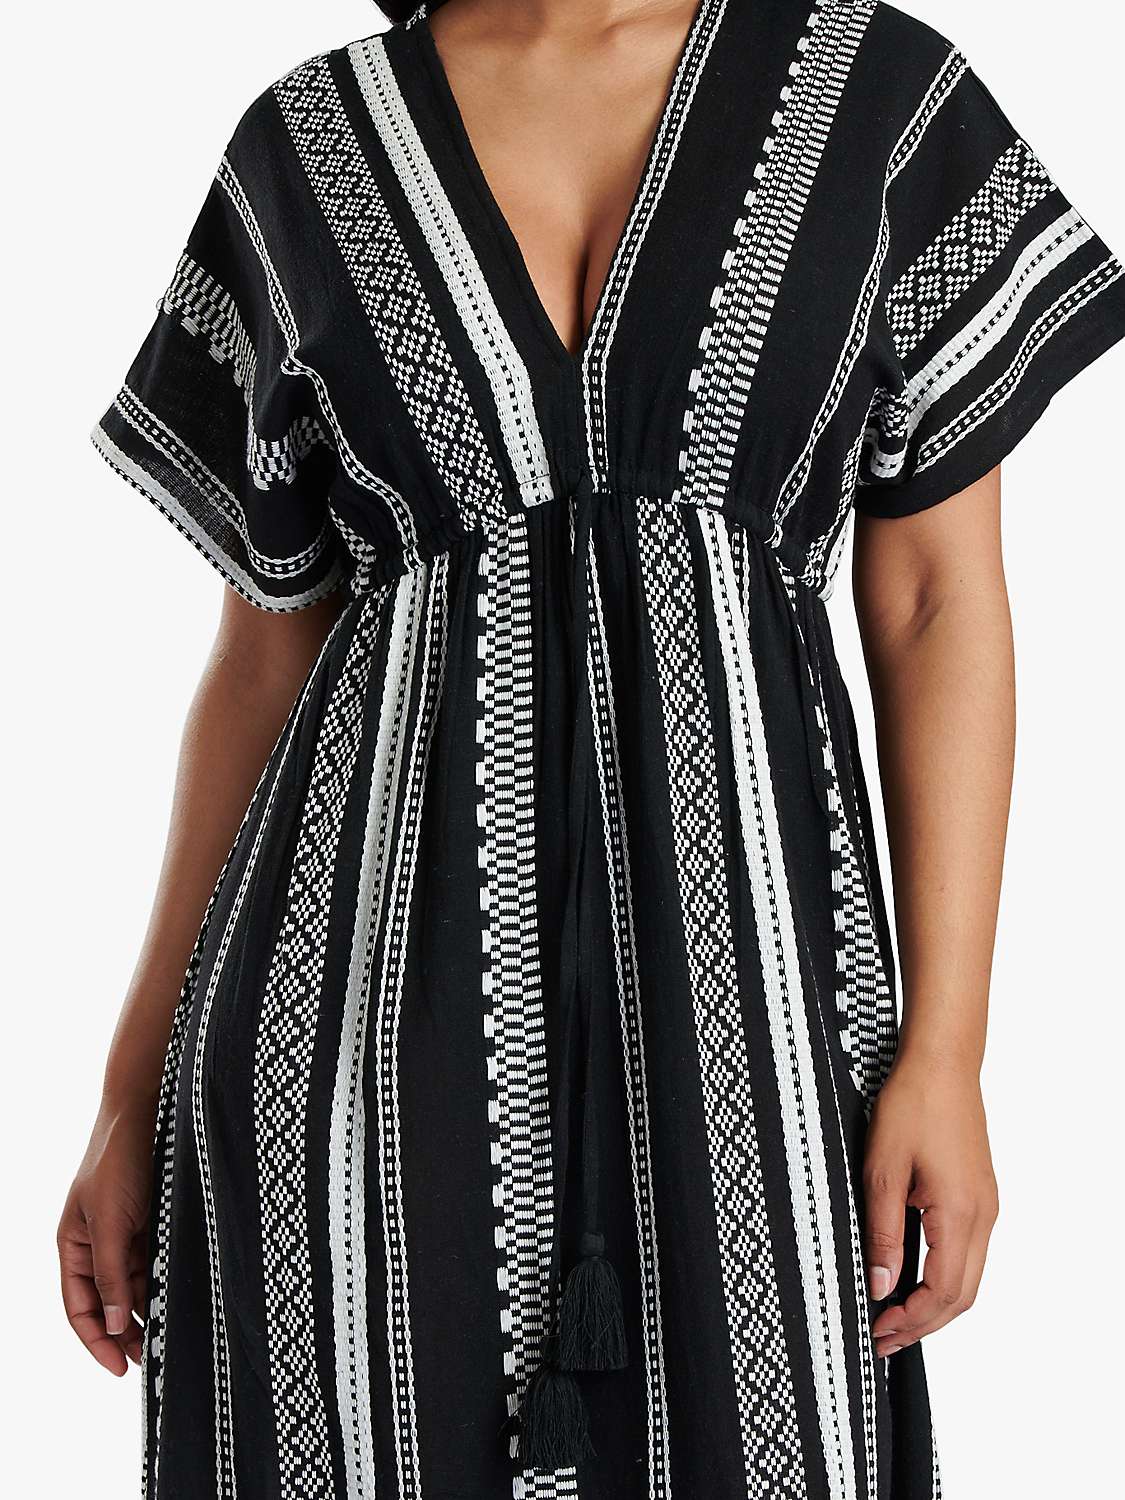 Buy South Beach Tiered Maxi Dress, Black Online at johnlewis.com